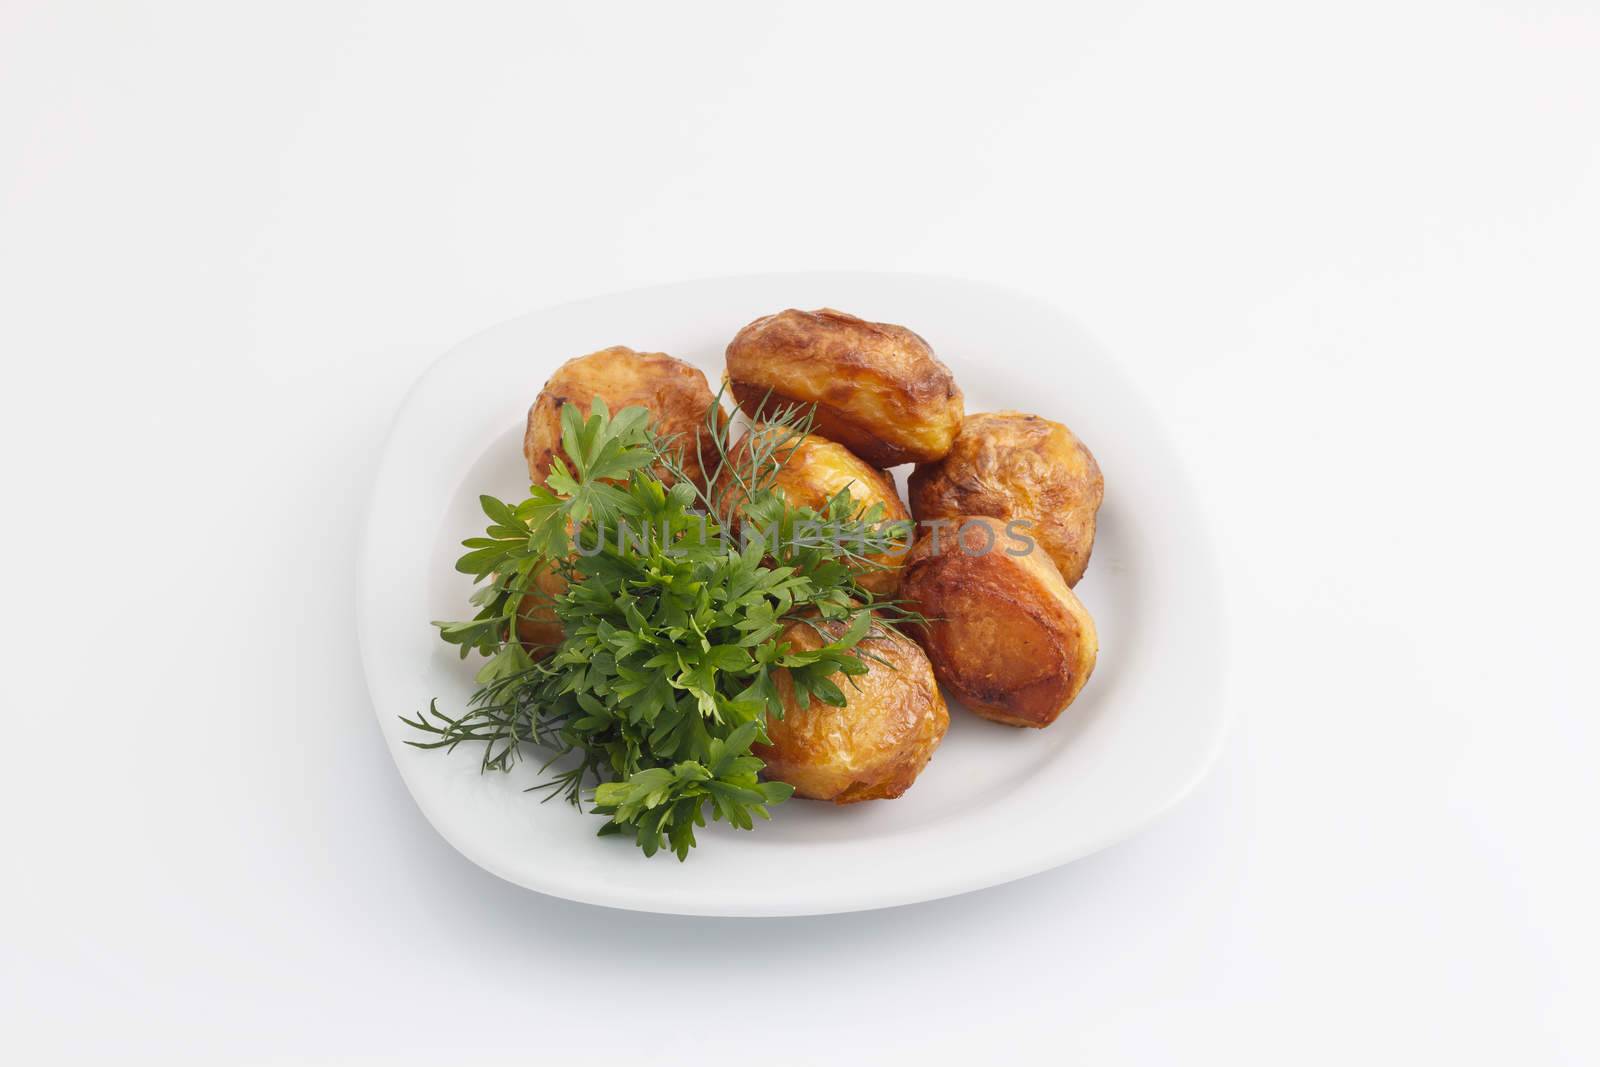 Baked potatoes with dill and parsley on a white background